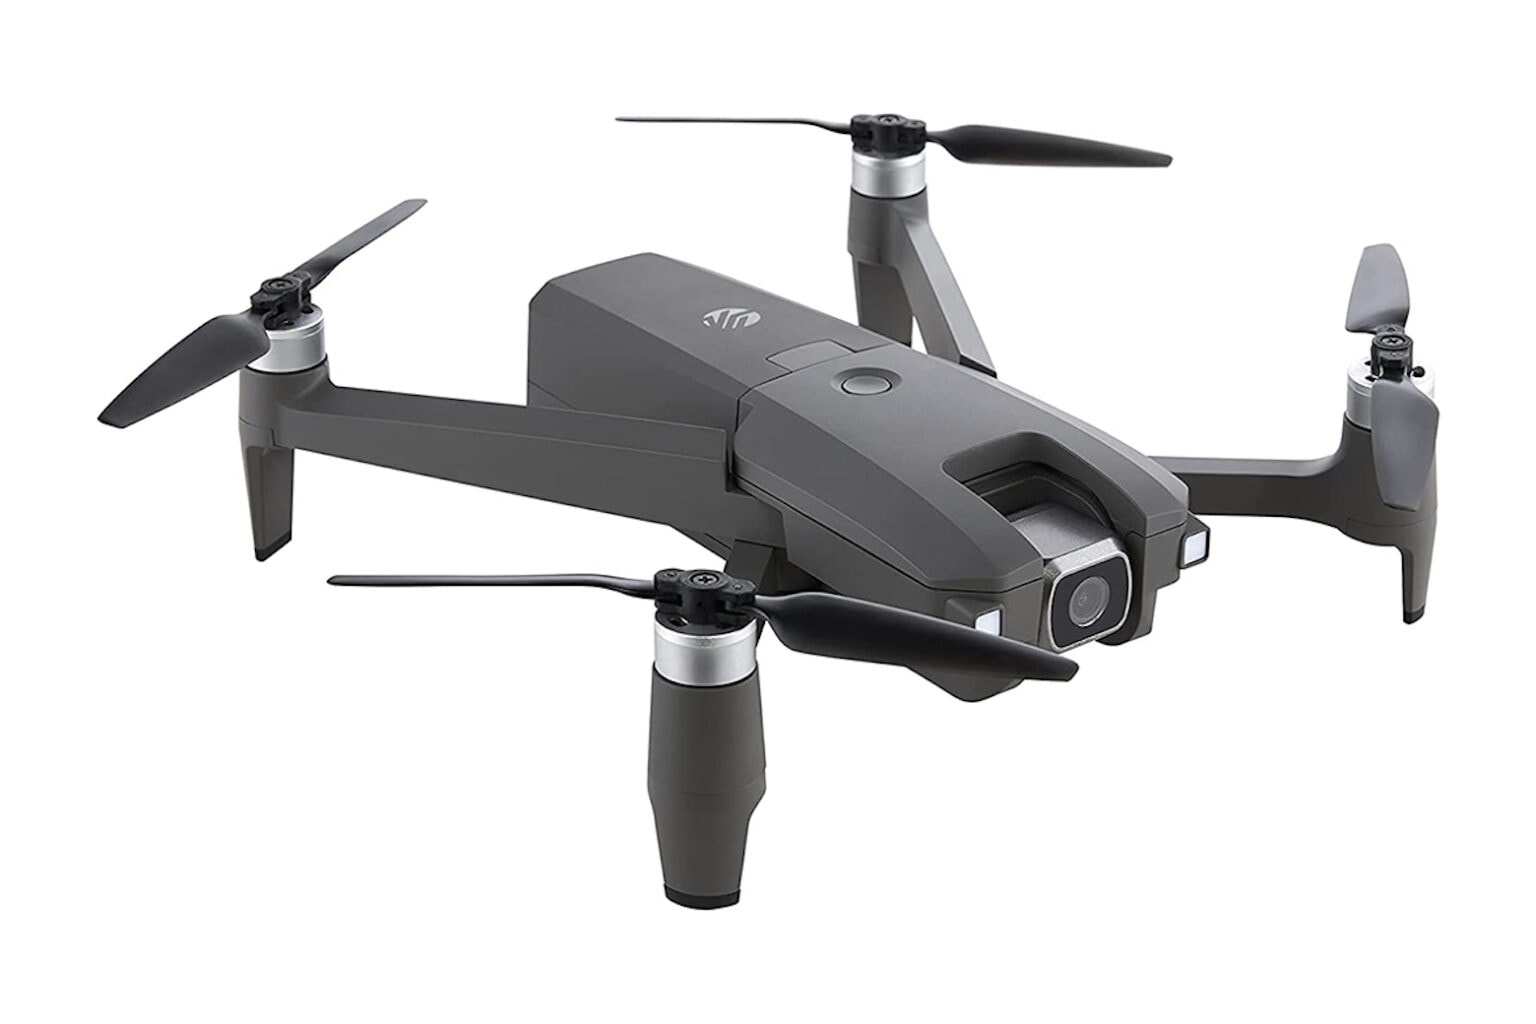 Get this awesome foldable camera drone for less than $140